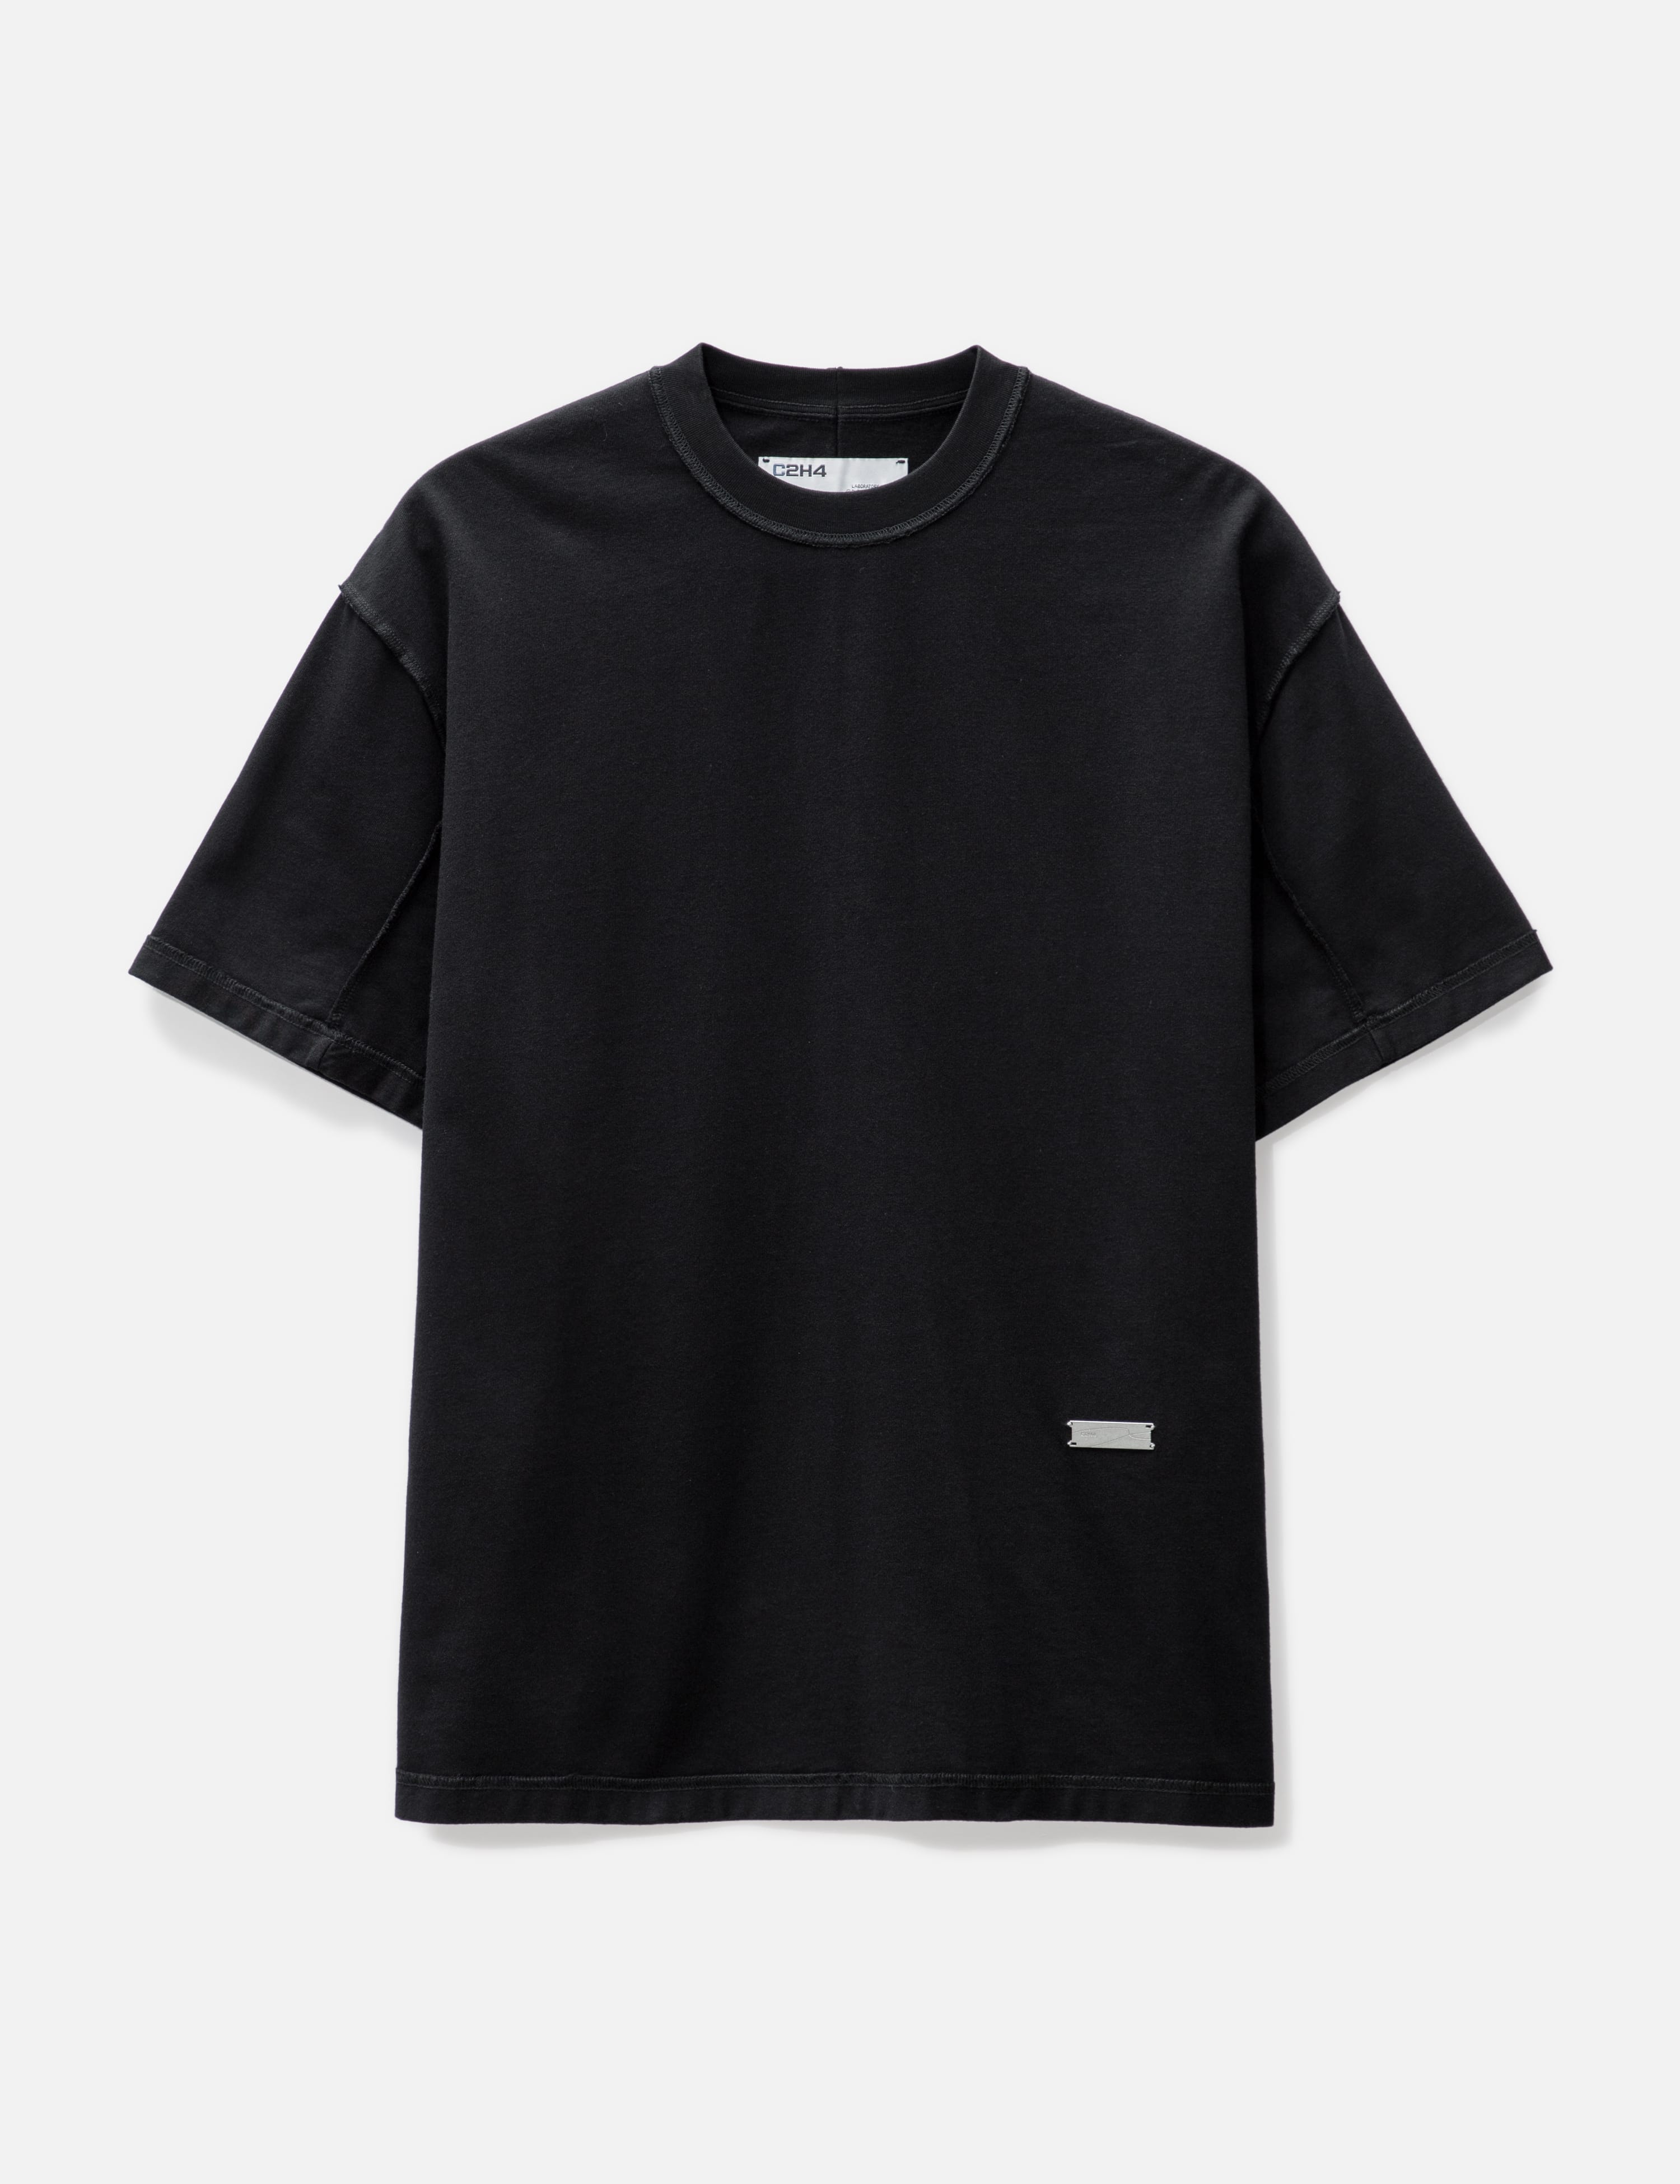 C2H4 - 005 - Inside-Out Raw Edge T-shirt | HBX - Globally Curated